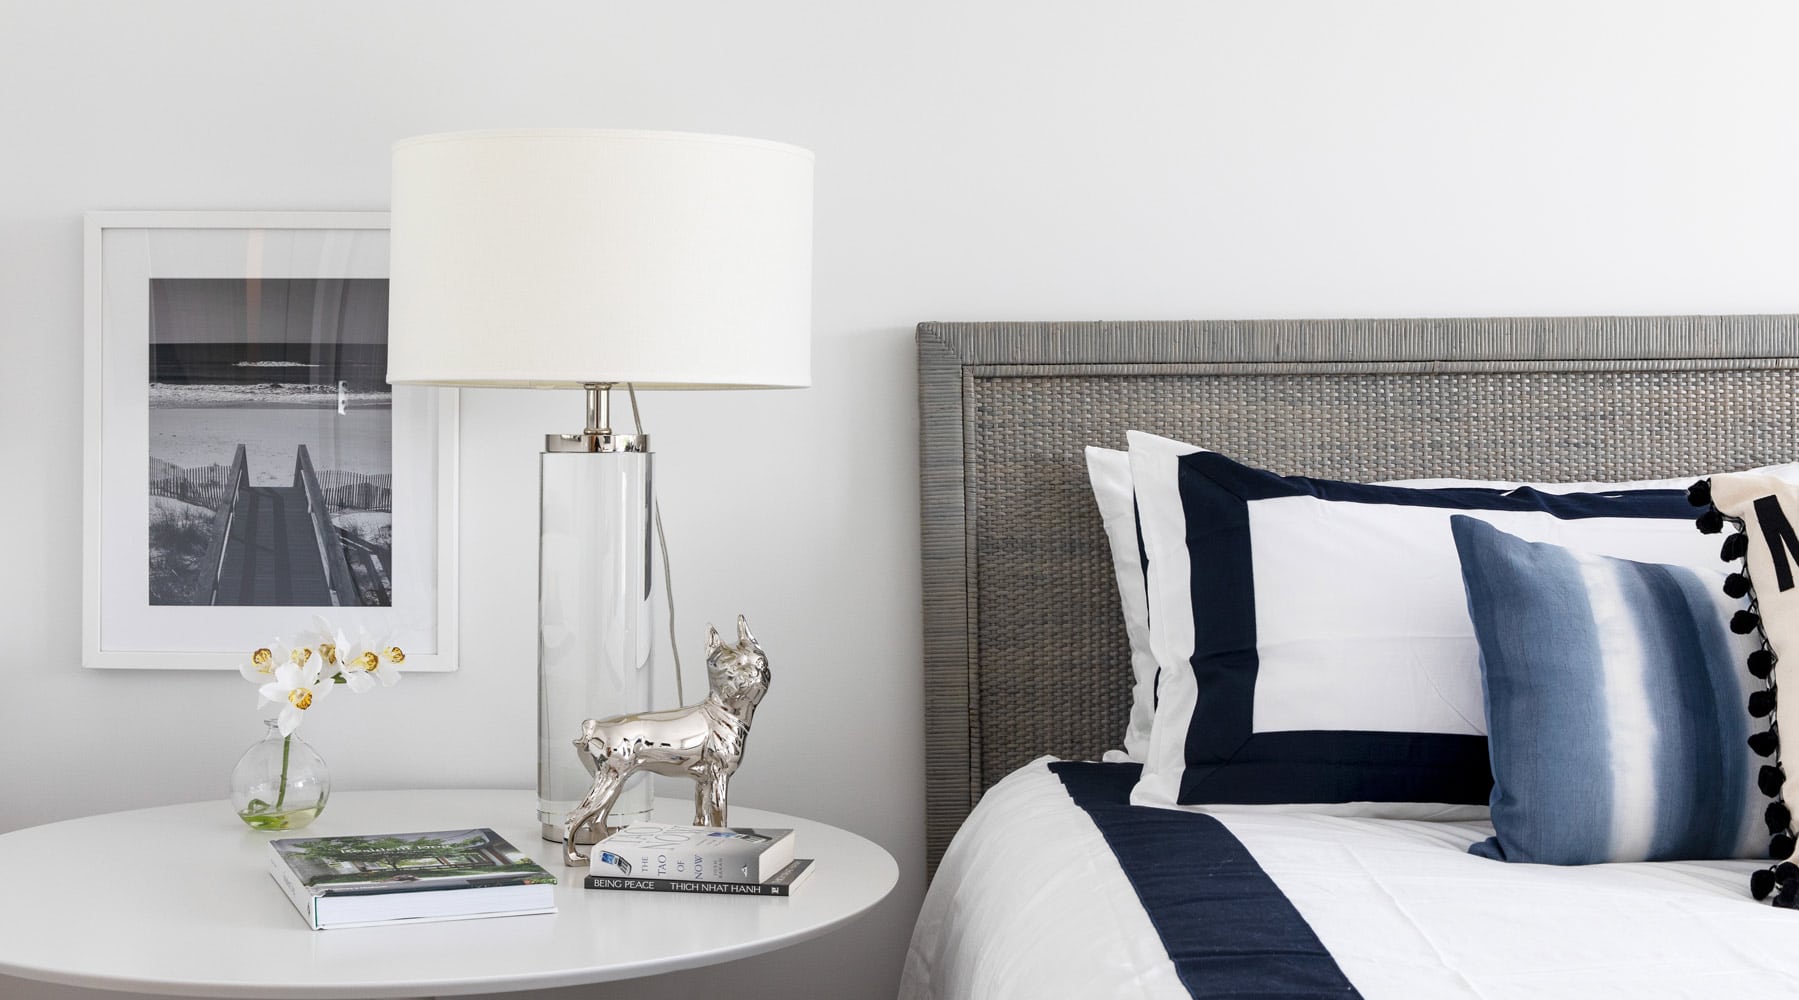 Hamptons boathouse bedroom decor by Annette Jaffe Interiors